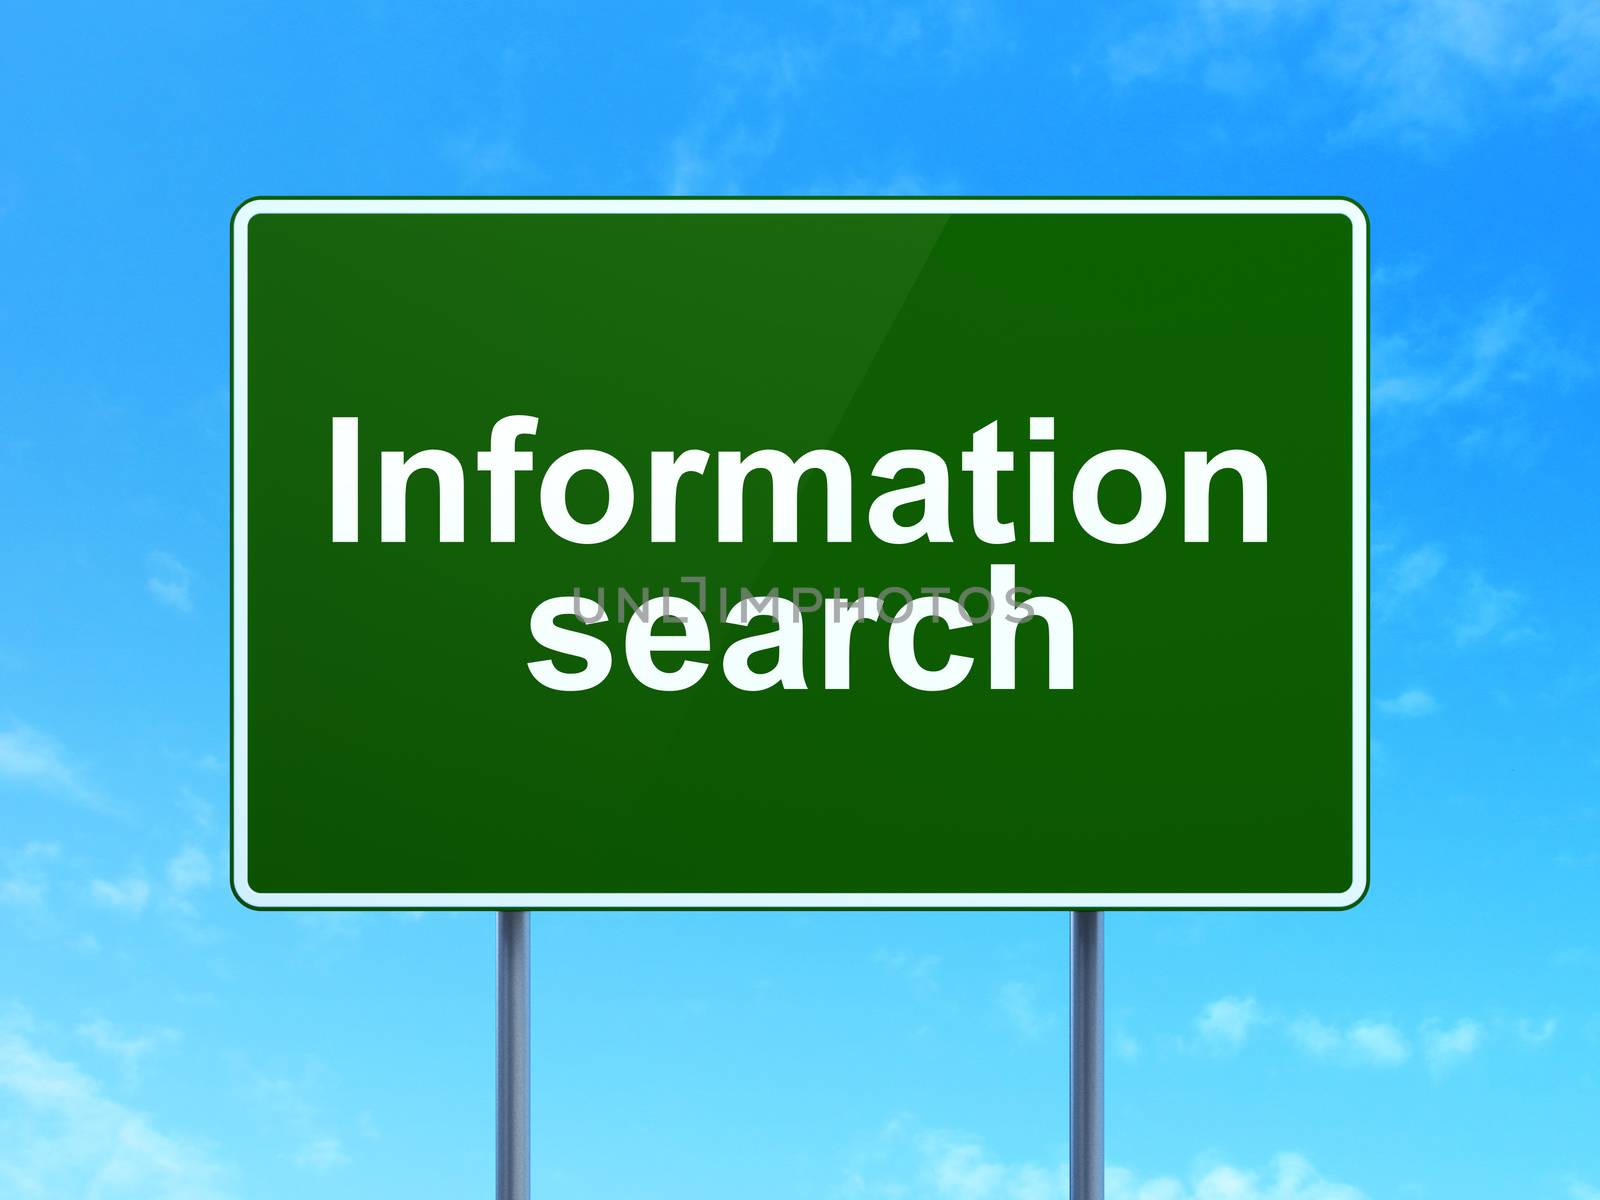 Data concept: Information Search on green road (highway) sign, clear blue sky background, 3d render